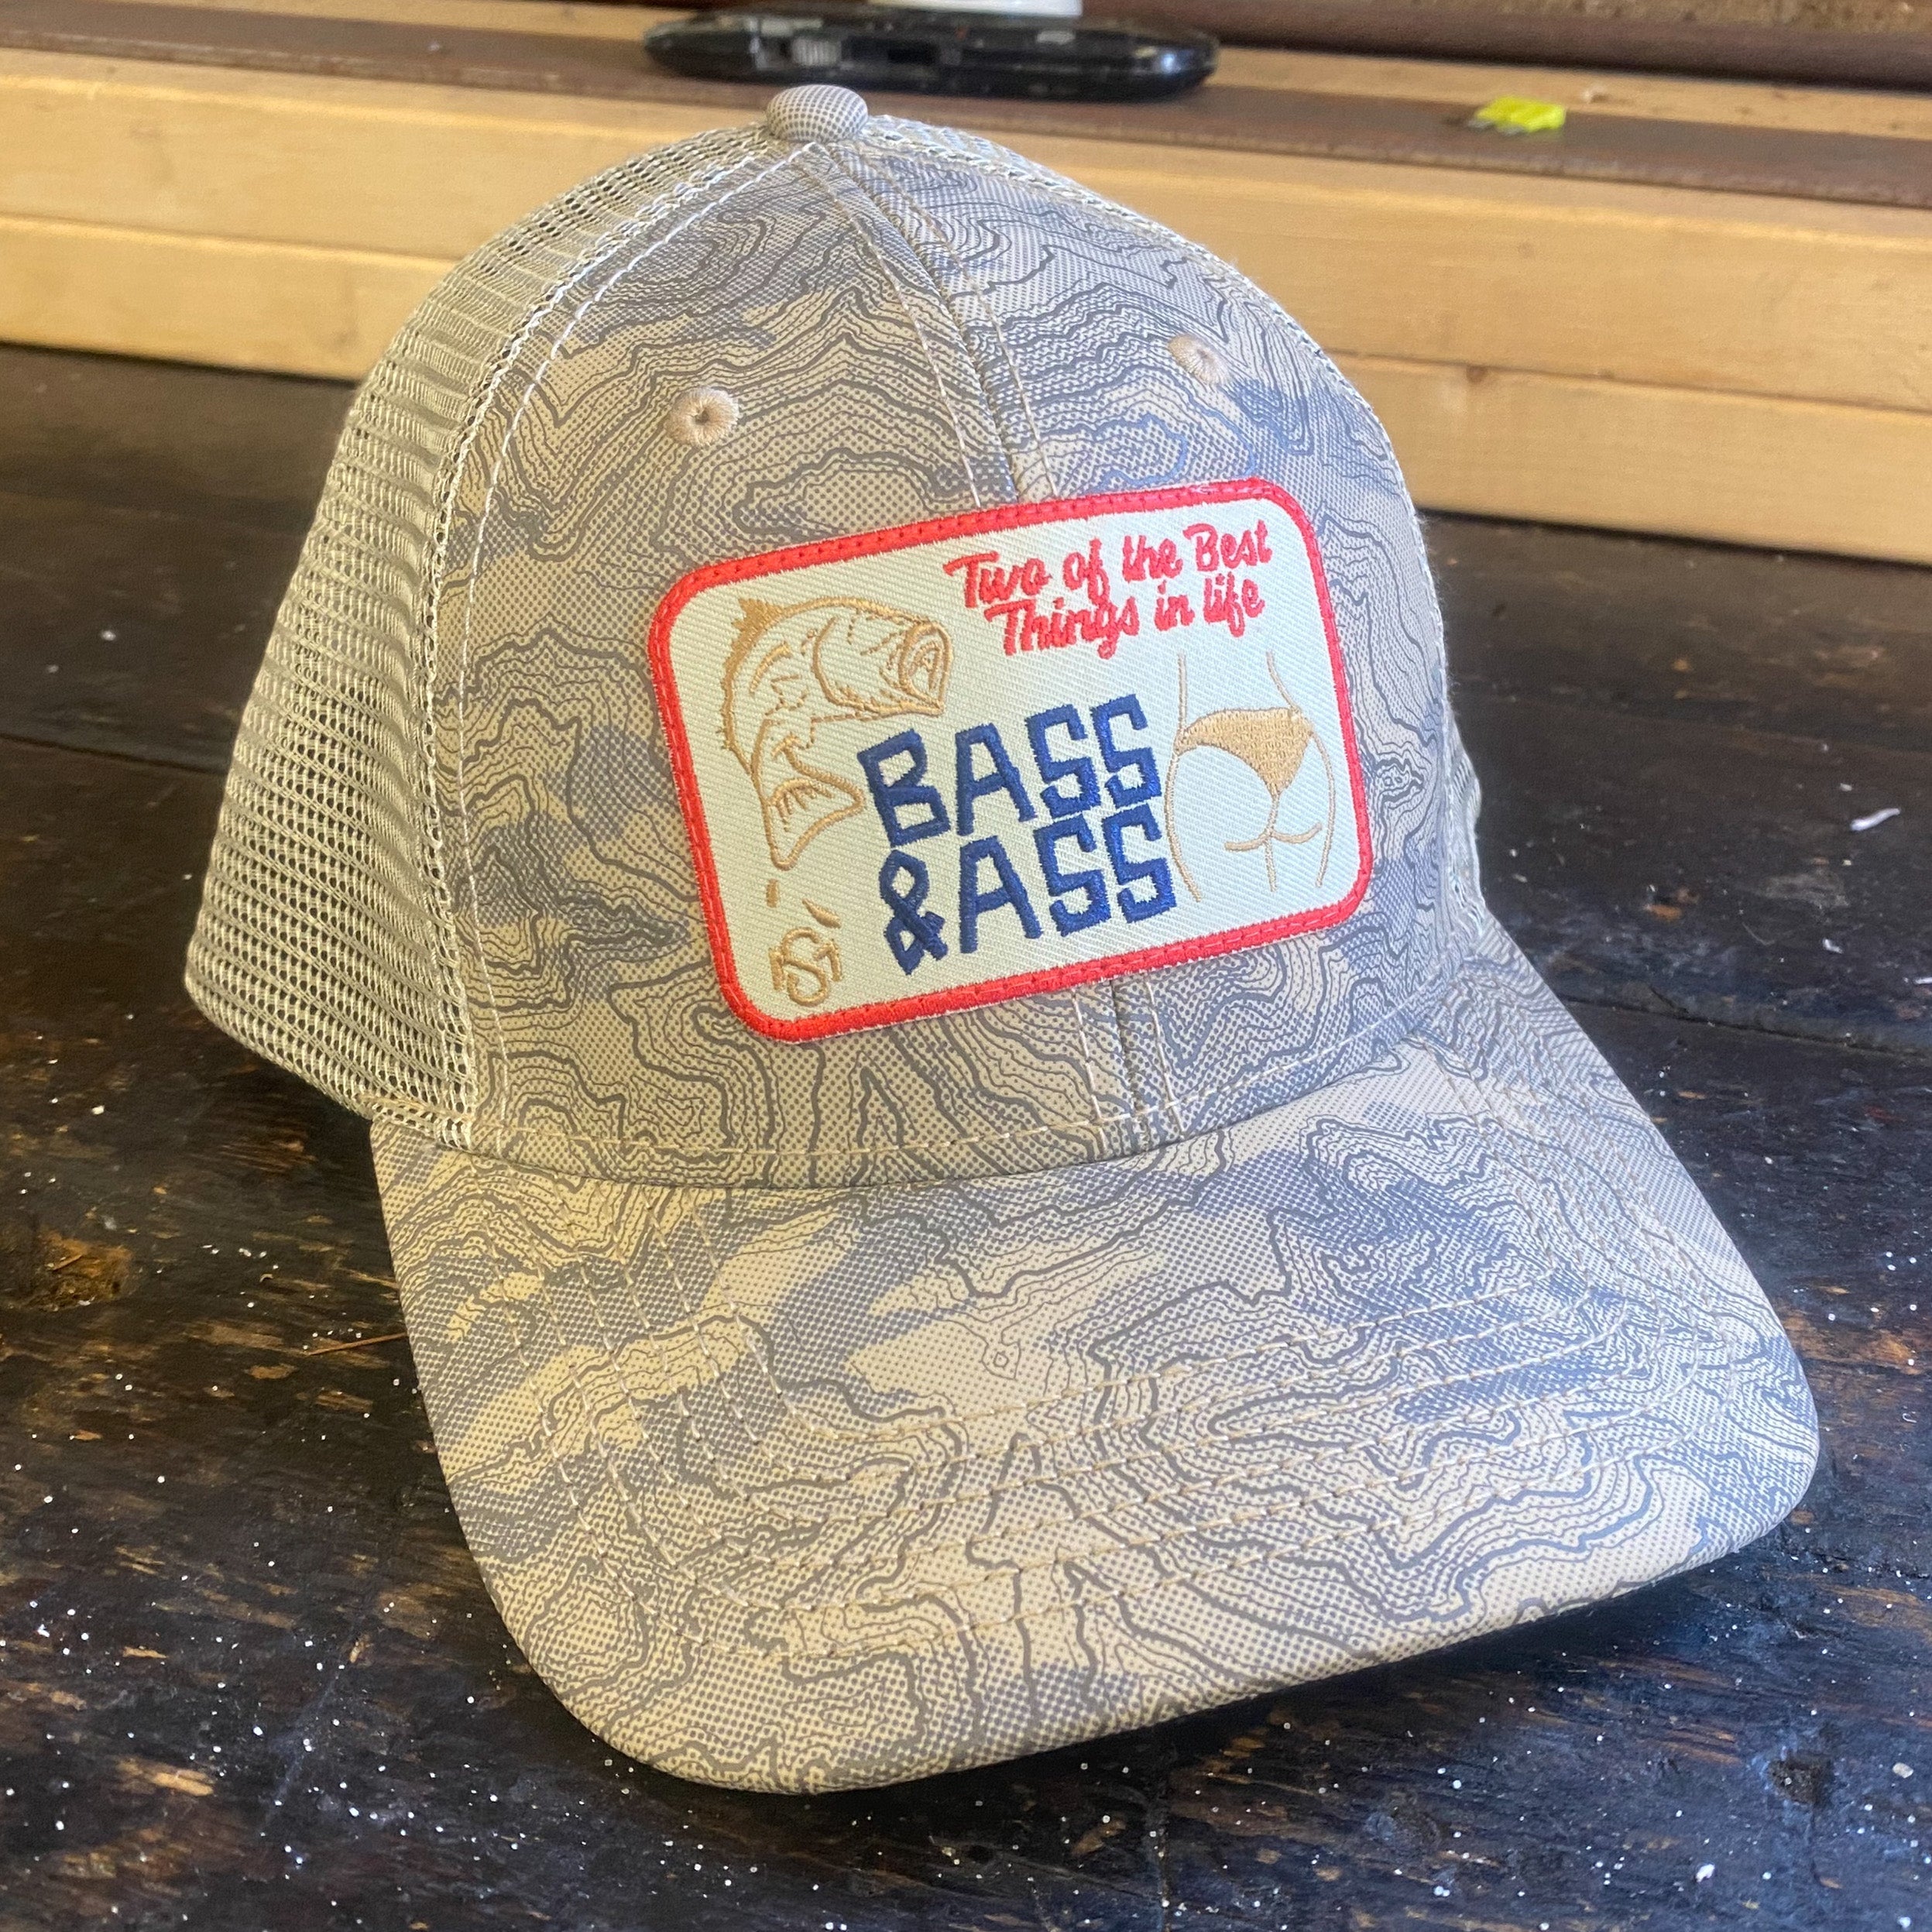 Bass and Ass Hat Graphite